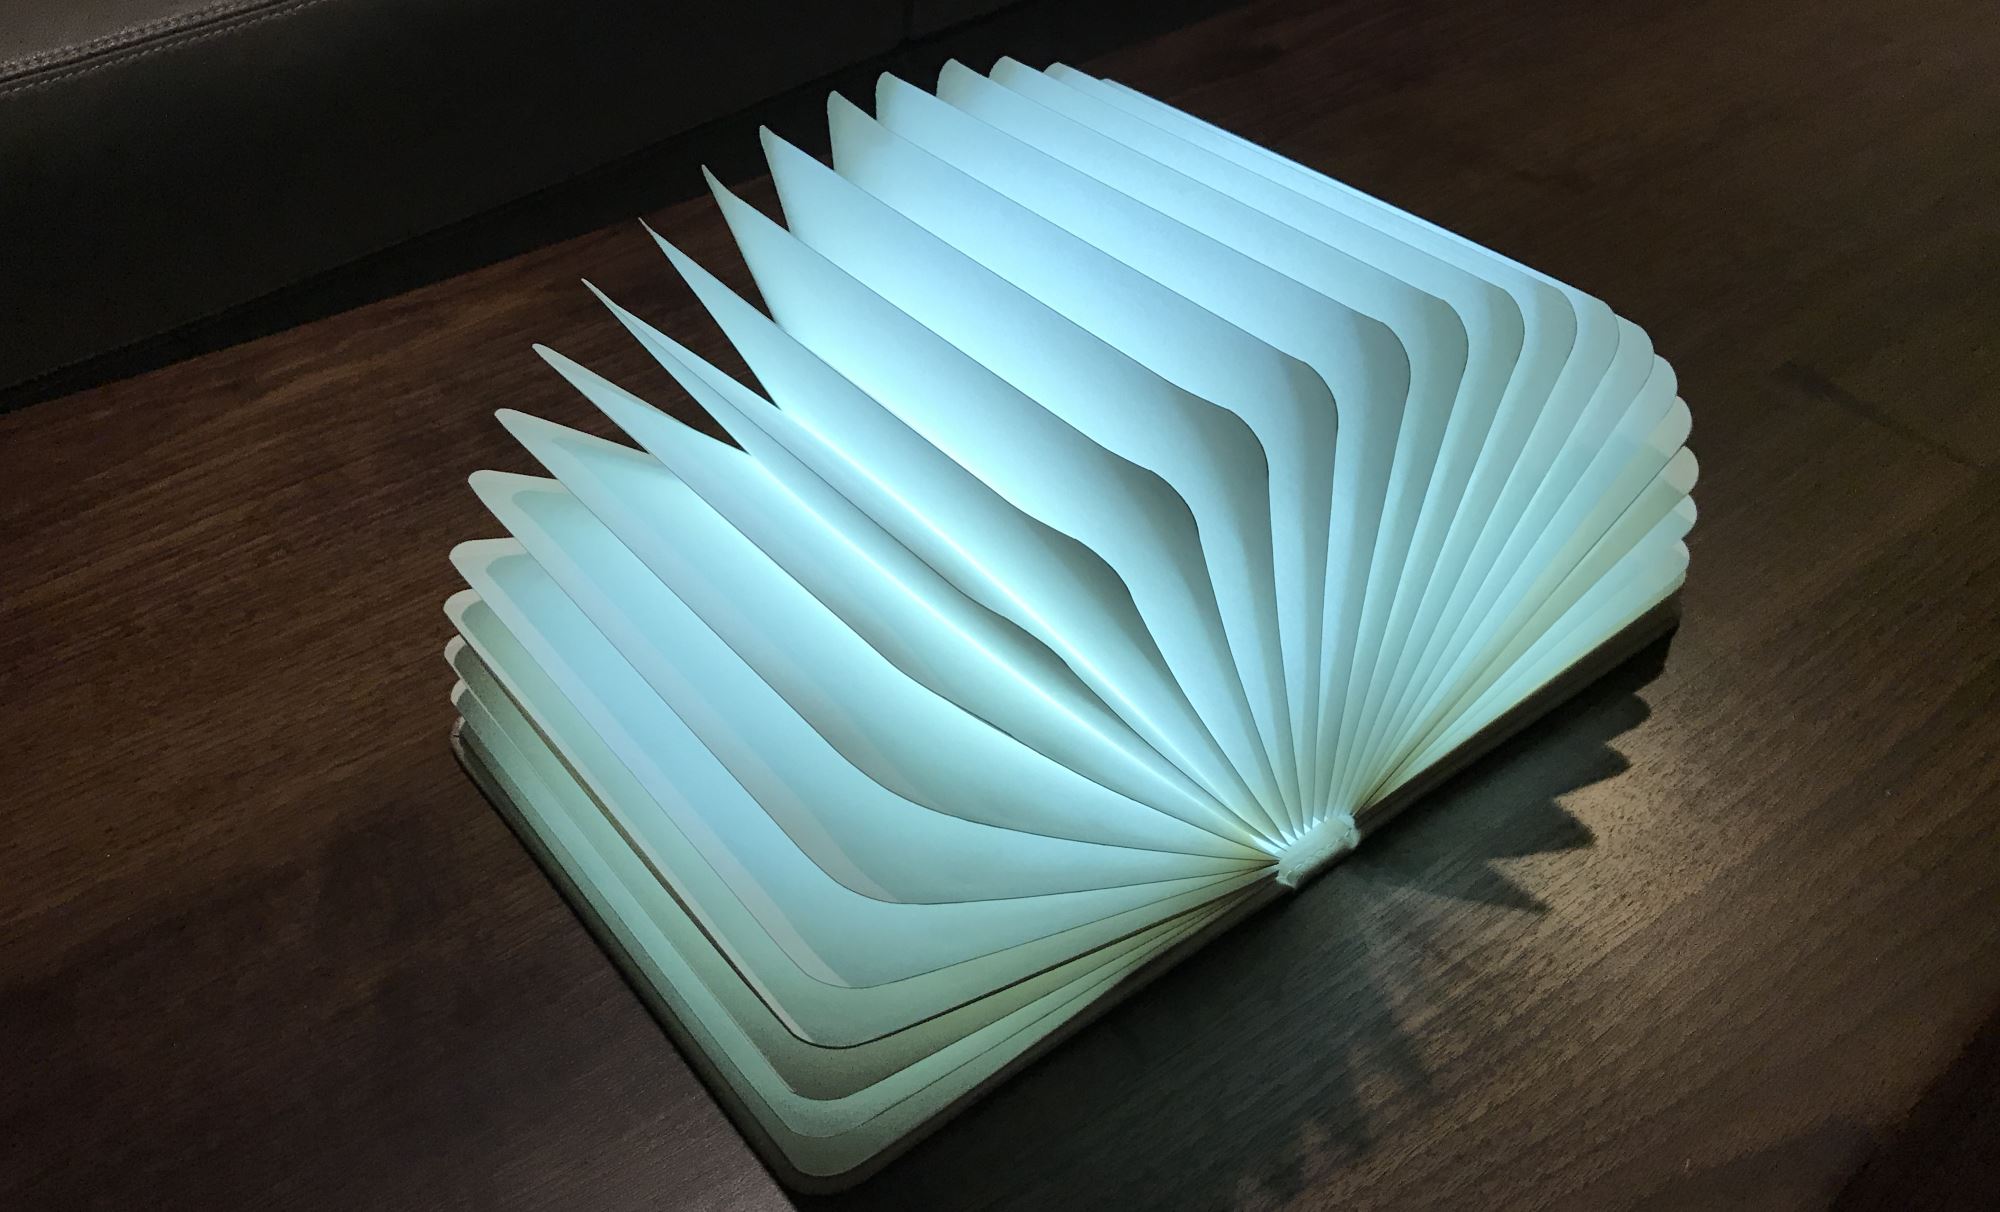 Veesee 8-Color Book Lamp